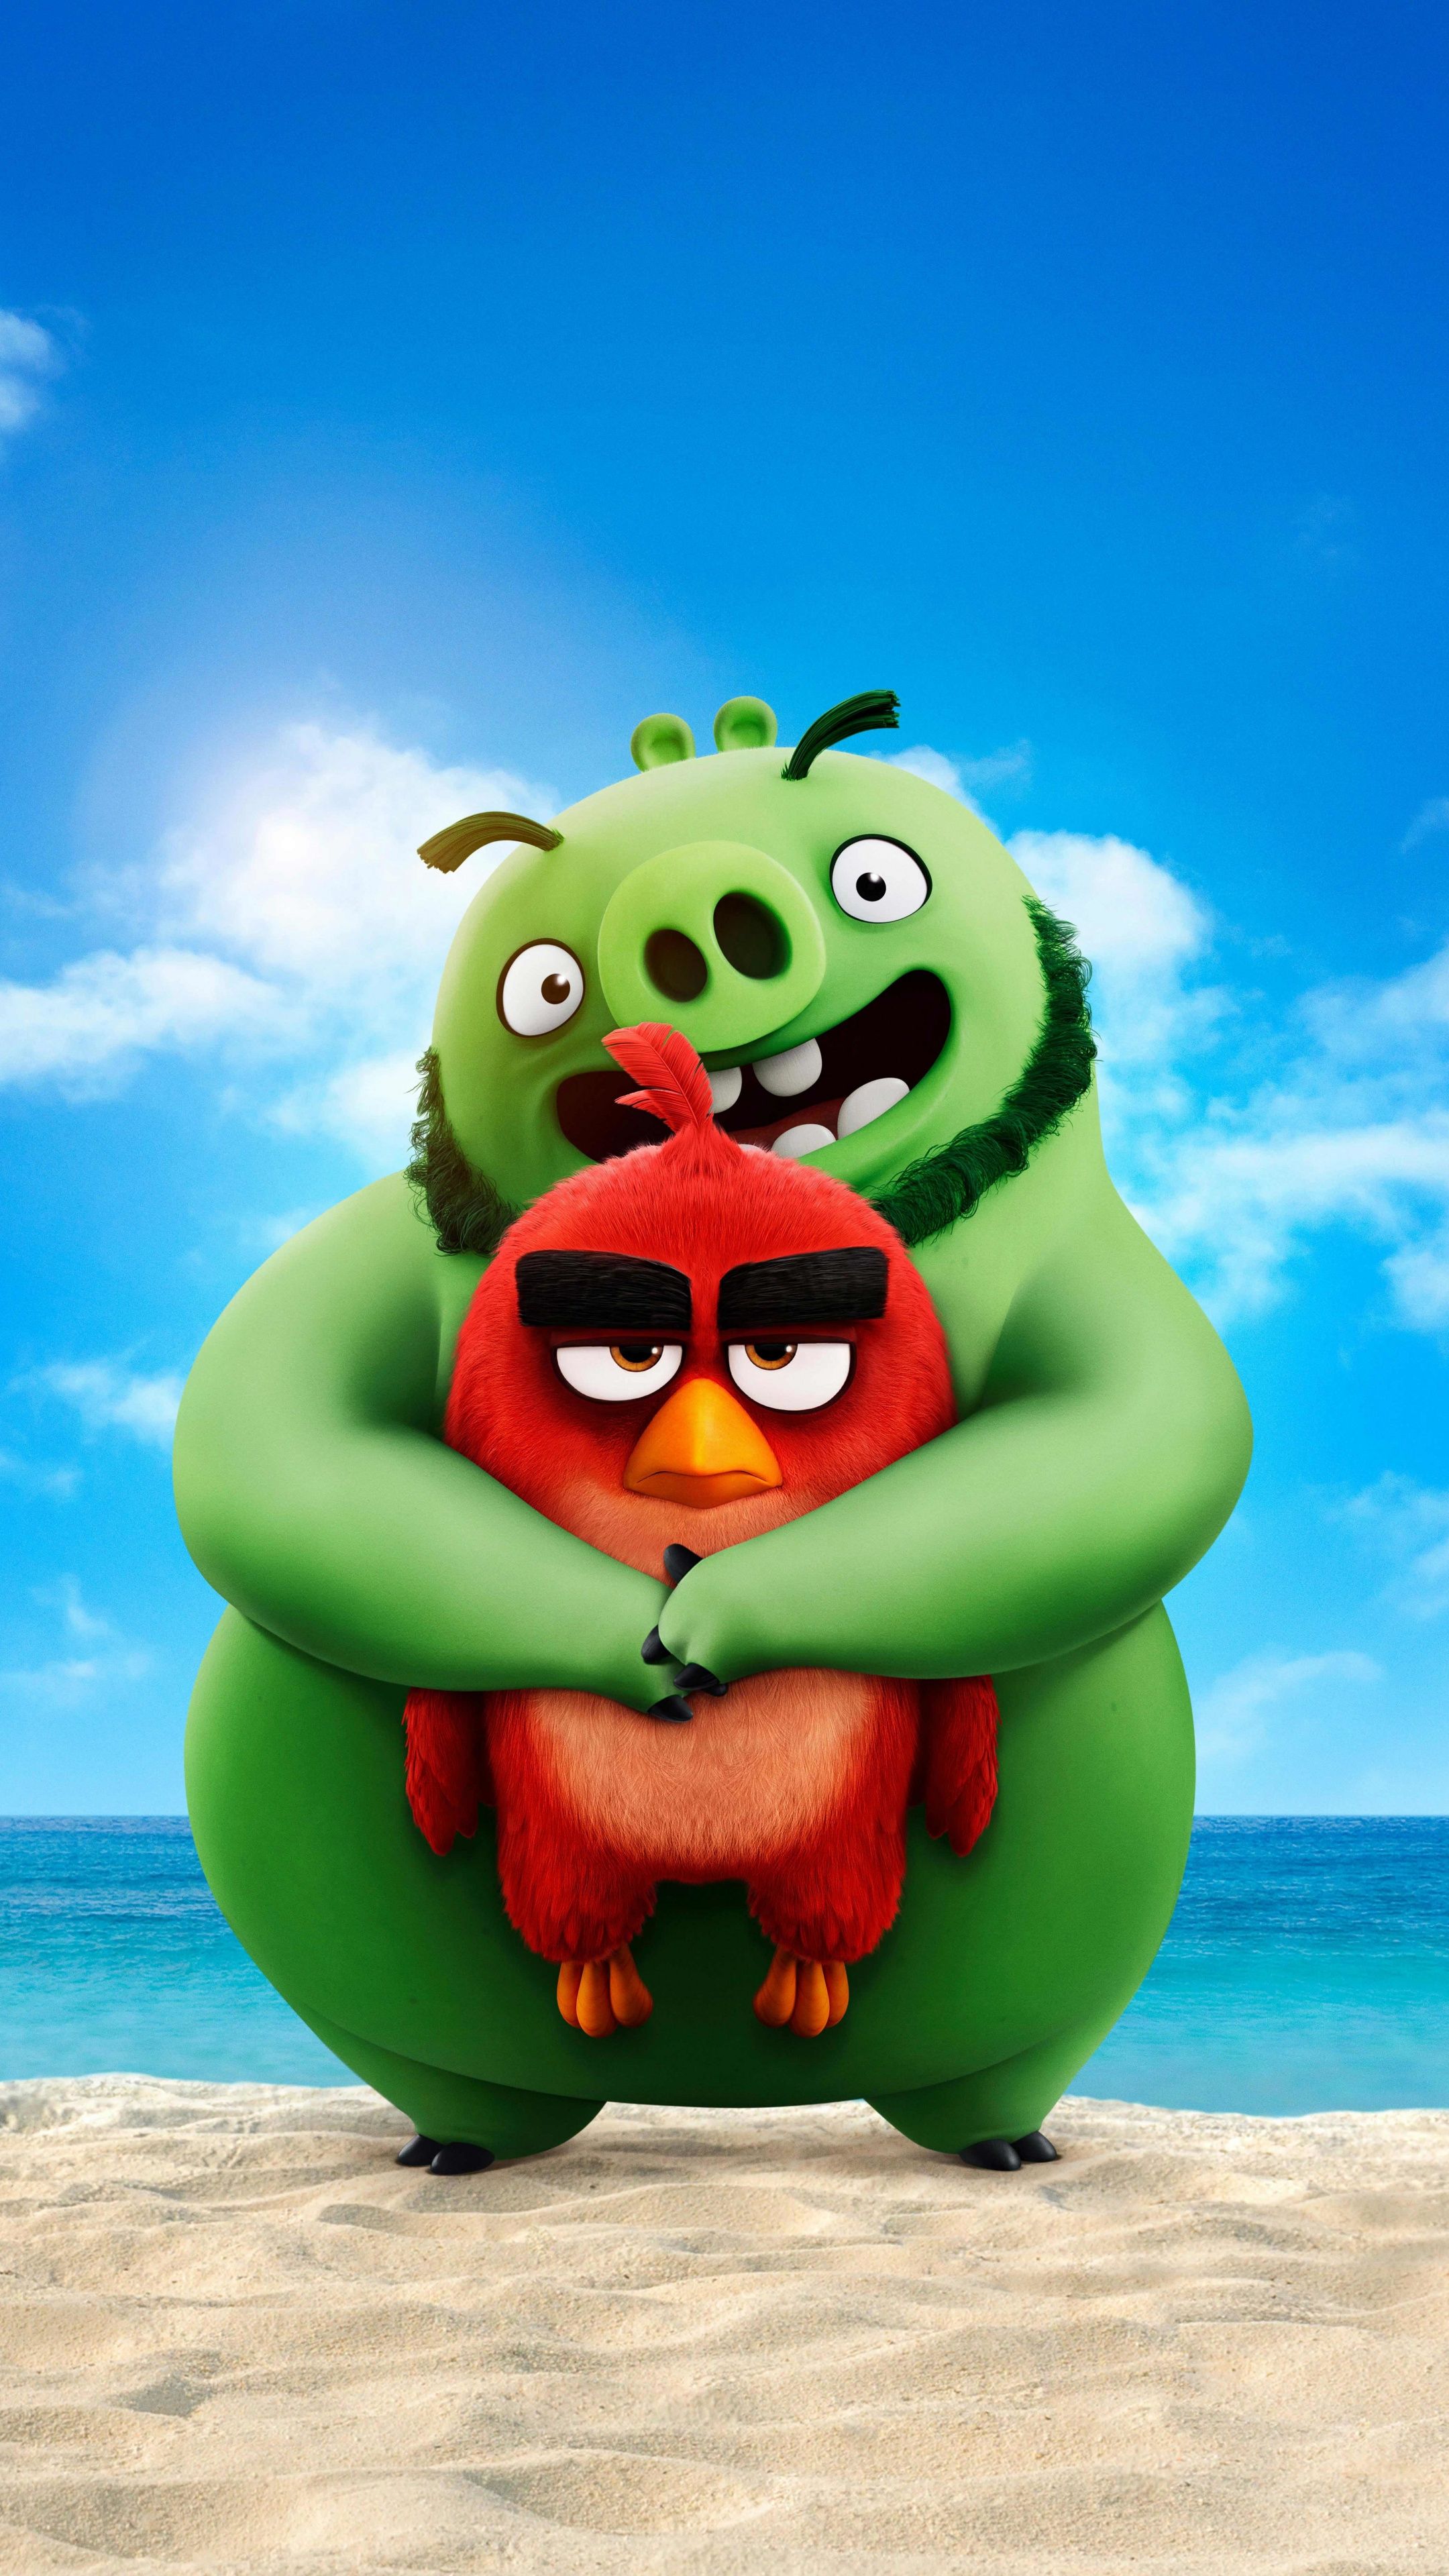 Movie, piggy and birdy, The Angry Birds Movie 2 wallpaper. Angry birds, Angry birds movie, Angry birds characters